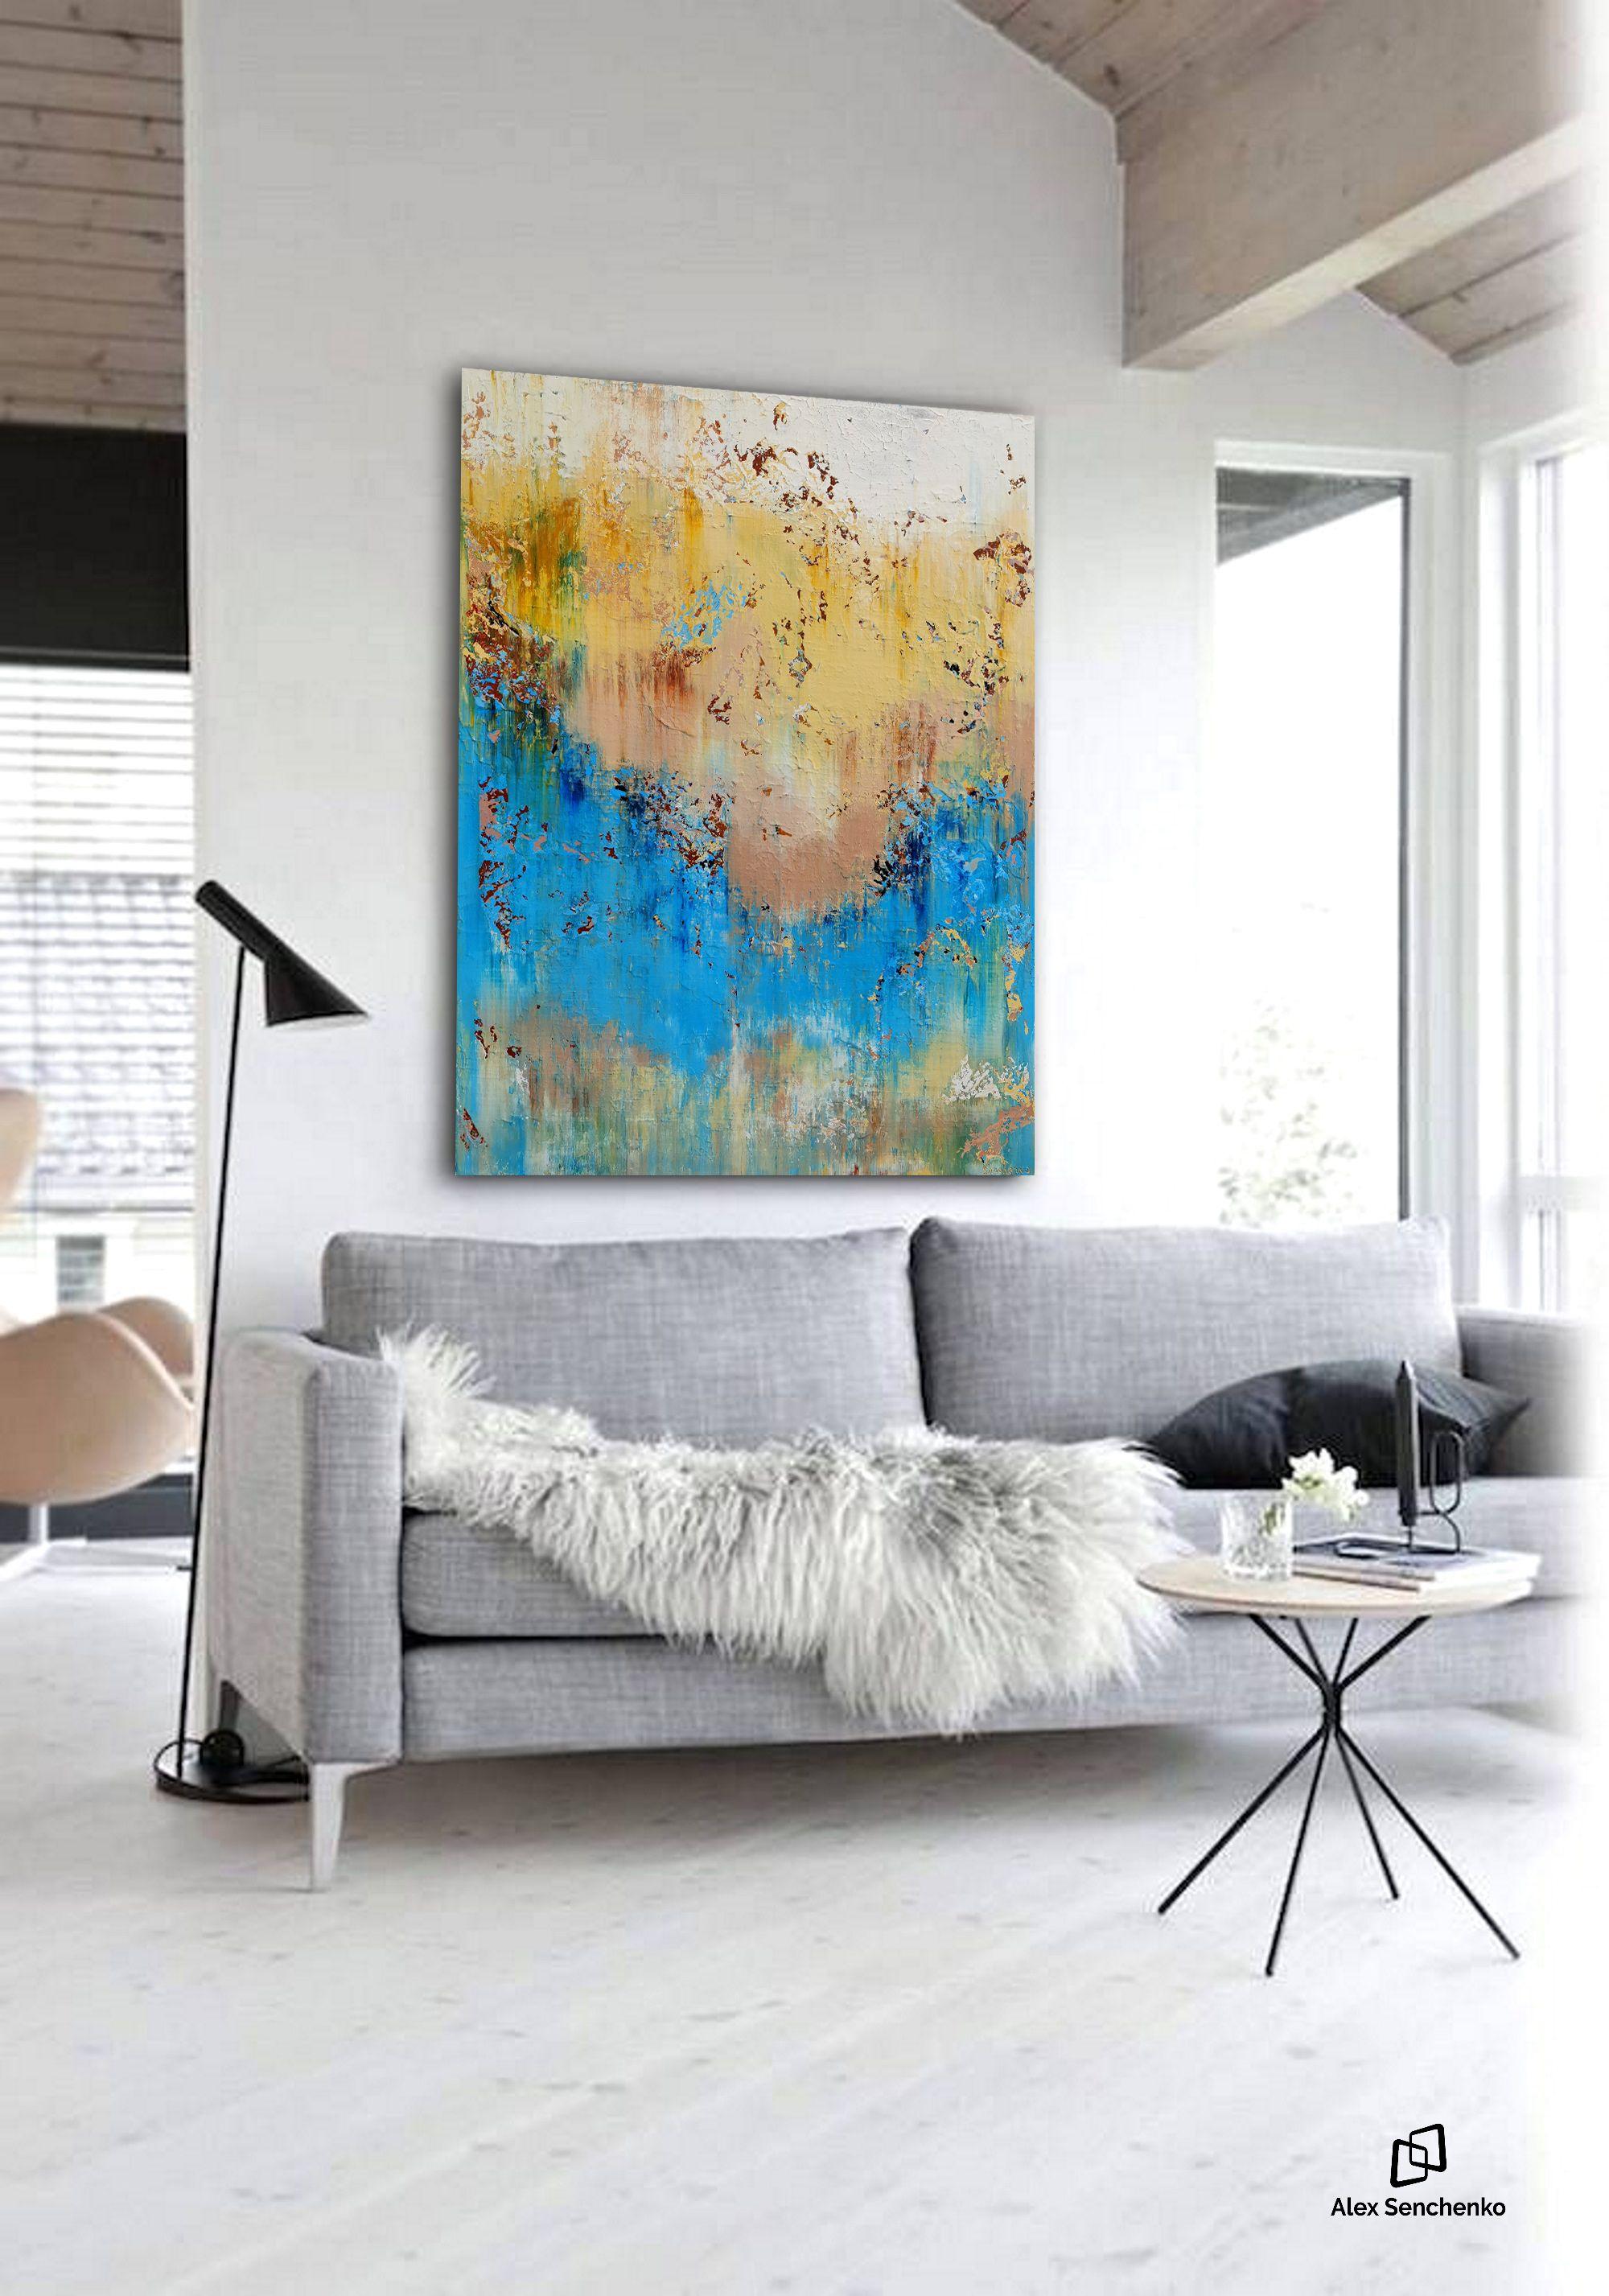 Thereâ€™s something different about the homes of creative people. They like to surround themselves with inspiring things, from unique tablecloths to the incredible paintings on the walls. Alex Senchenkoâ€™s - Abstract 2107 - can give your home that